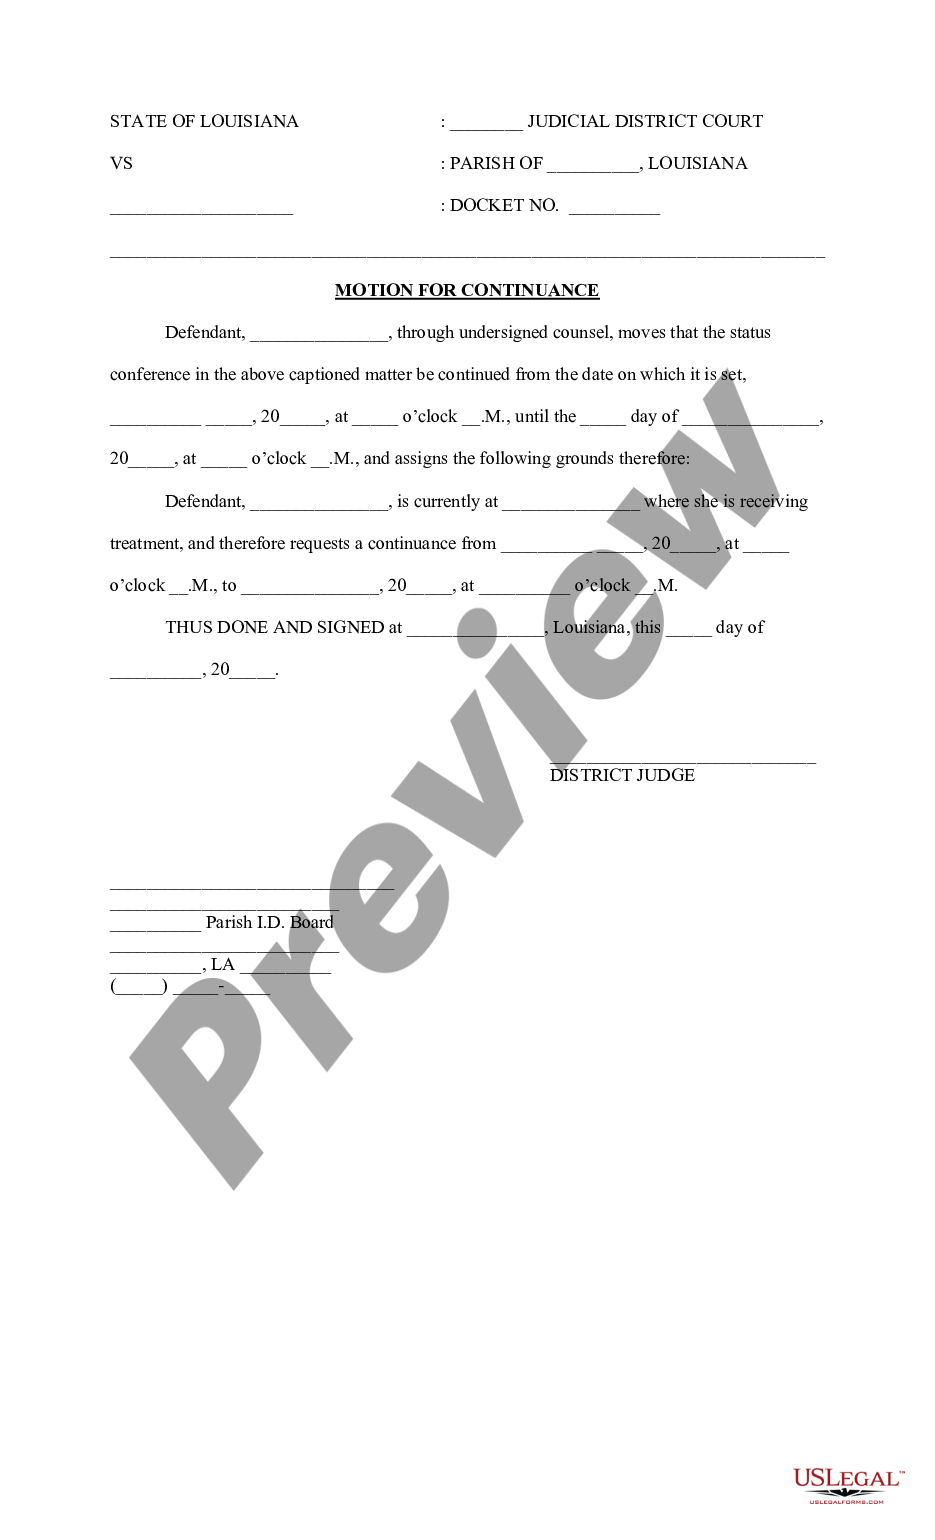 louisiana-motion-for-continuance-us-legal-forms